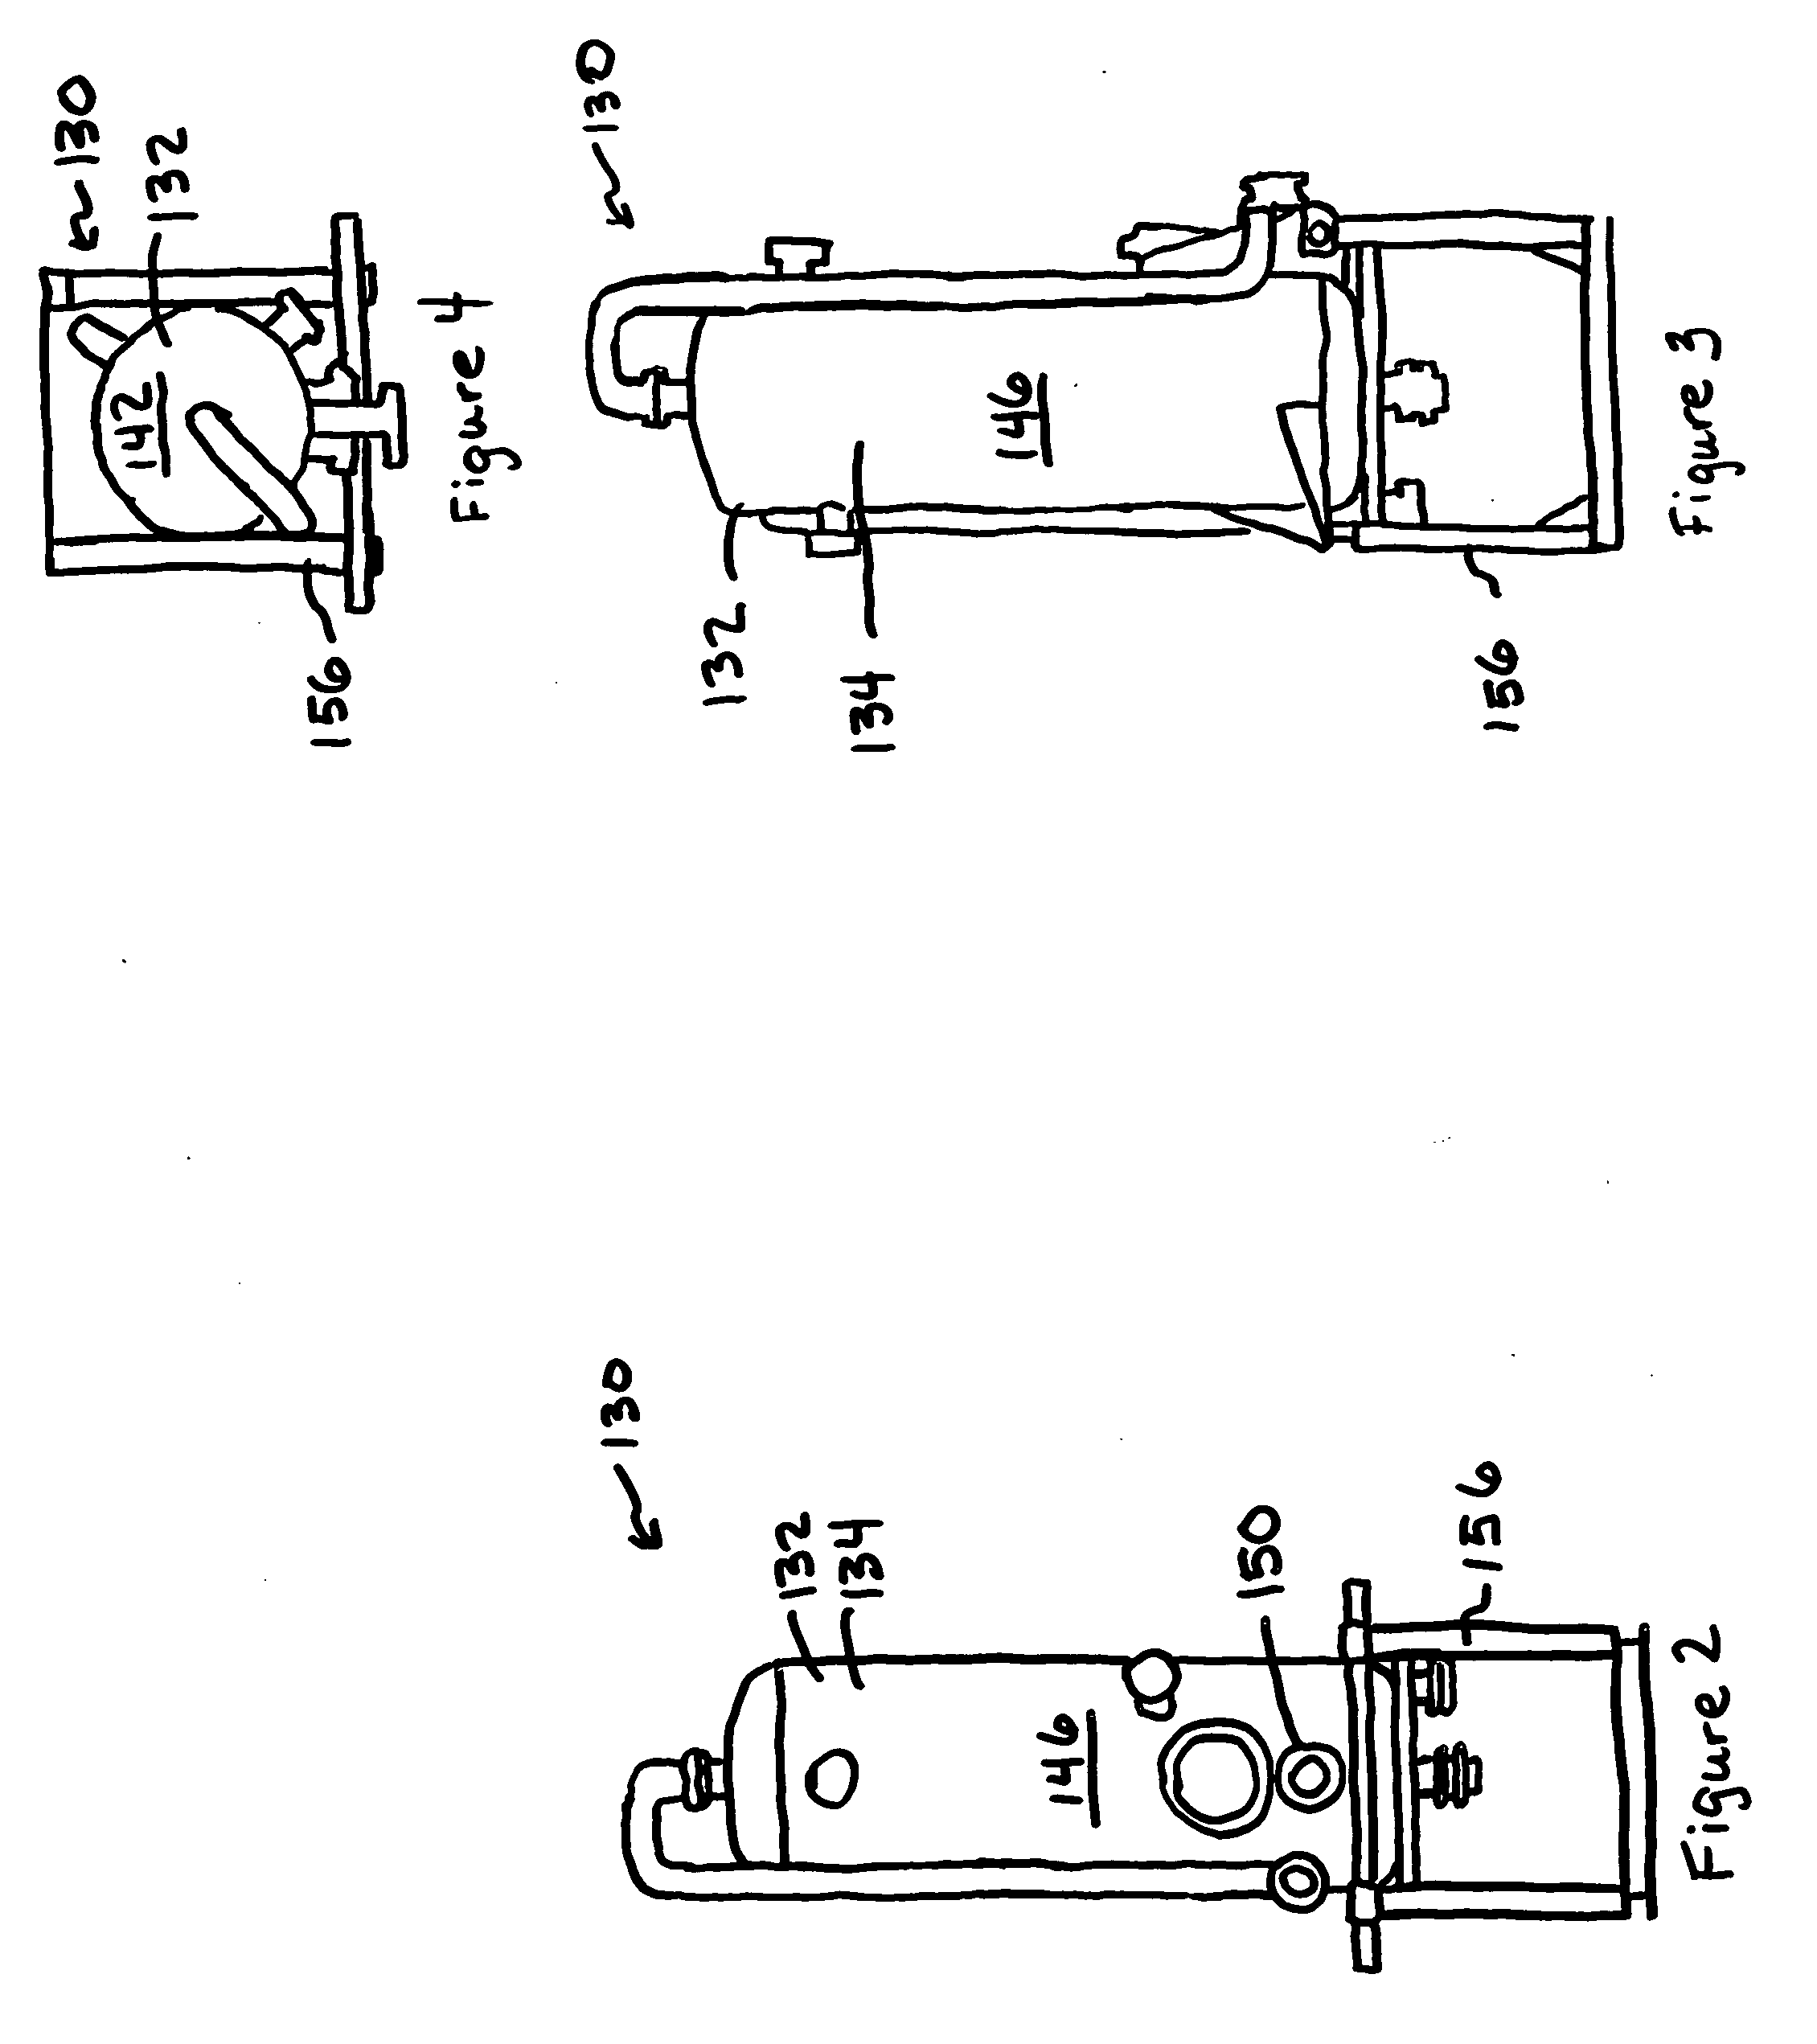 Modular pressure control and drilling waste management apparatus for subterranean borehole operations